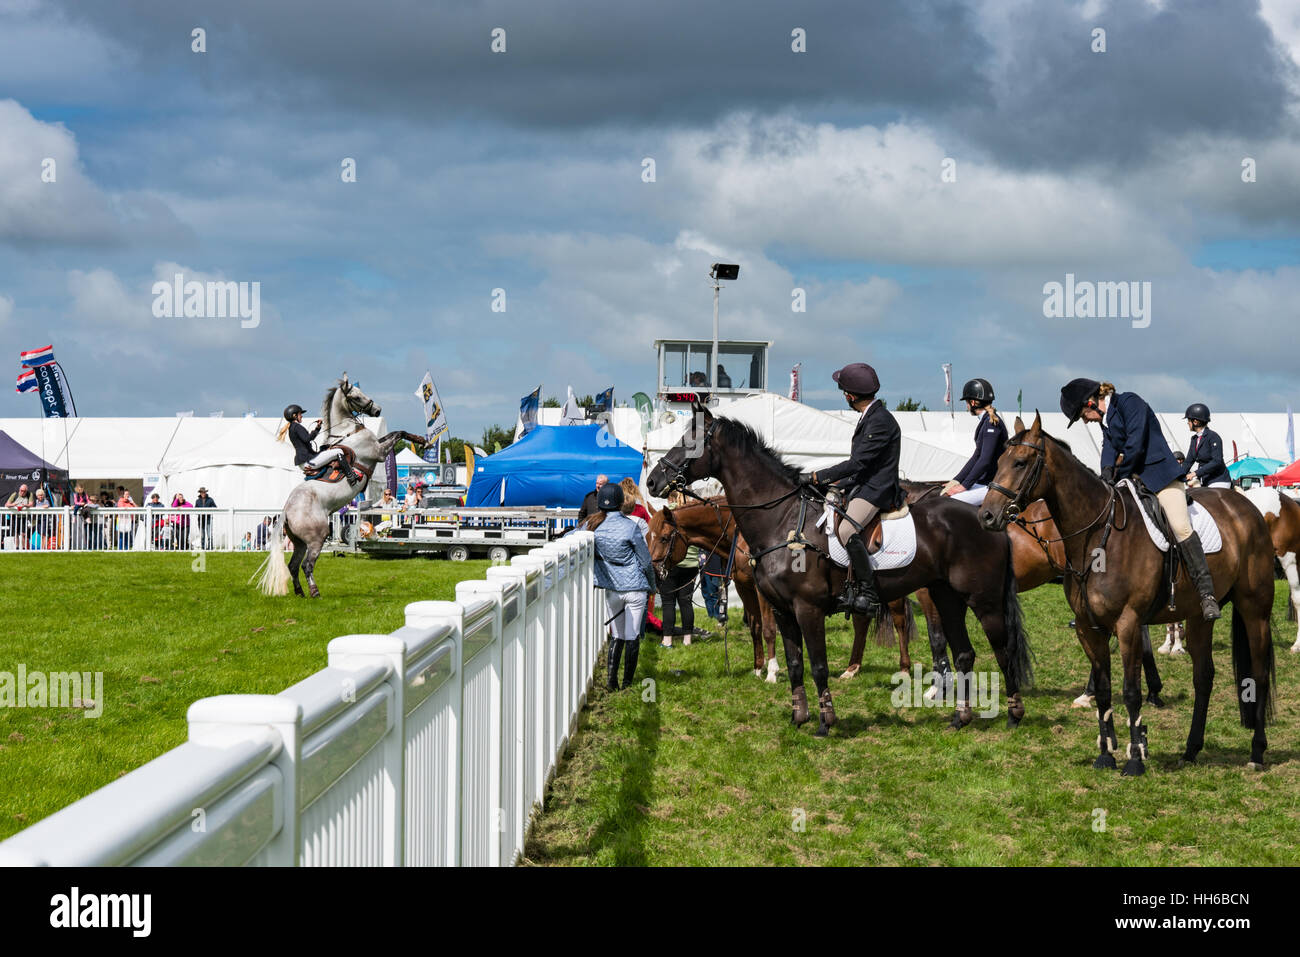 Horse rearing with female rider before competing in the show jumping at the Anglesey Show Stock Photo